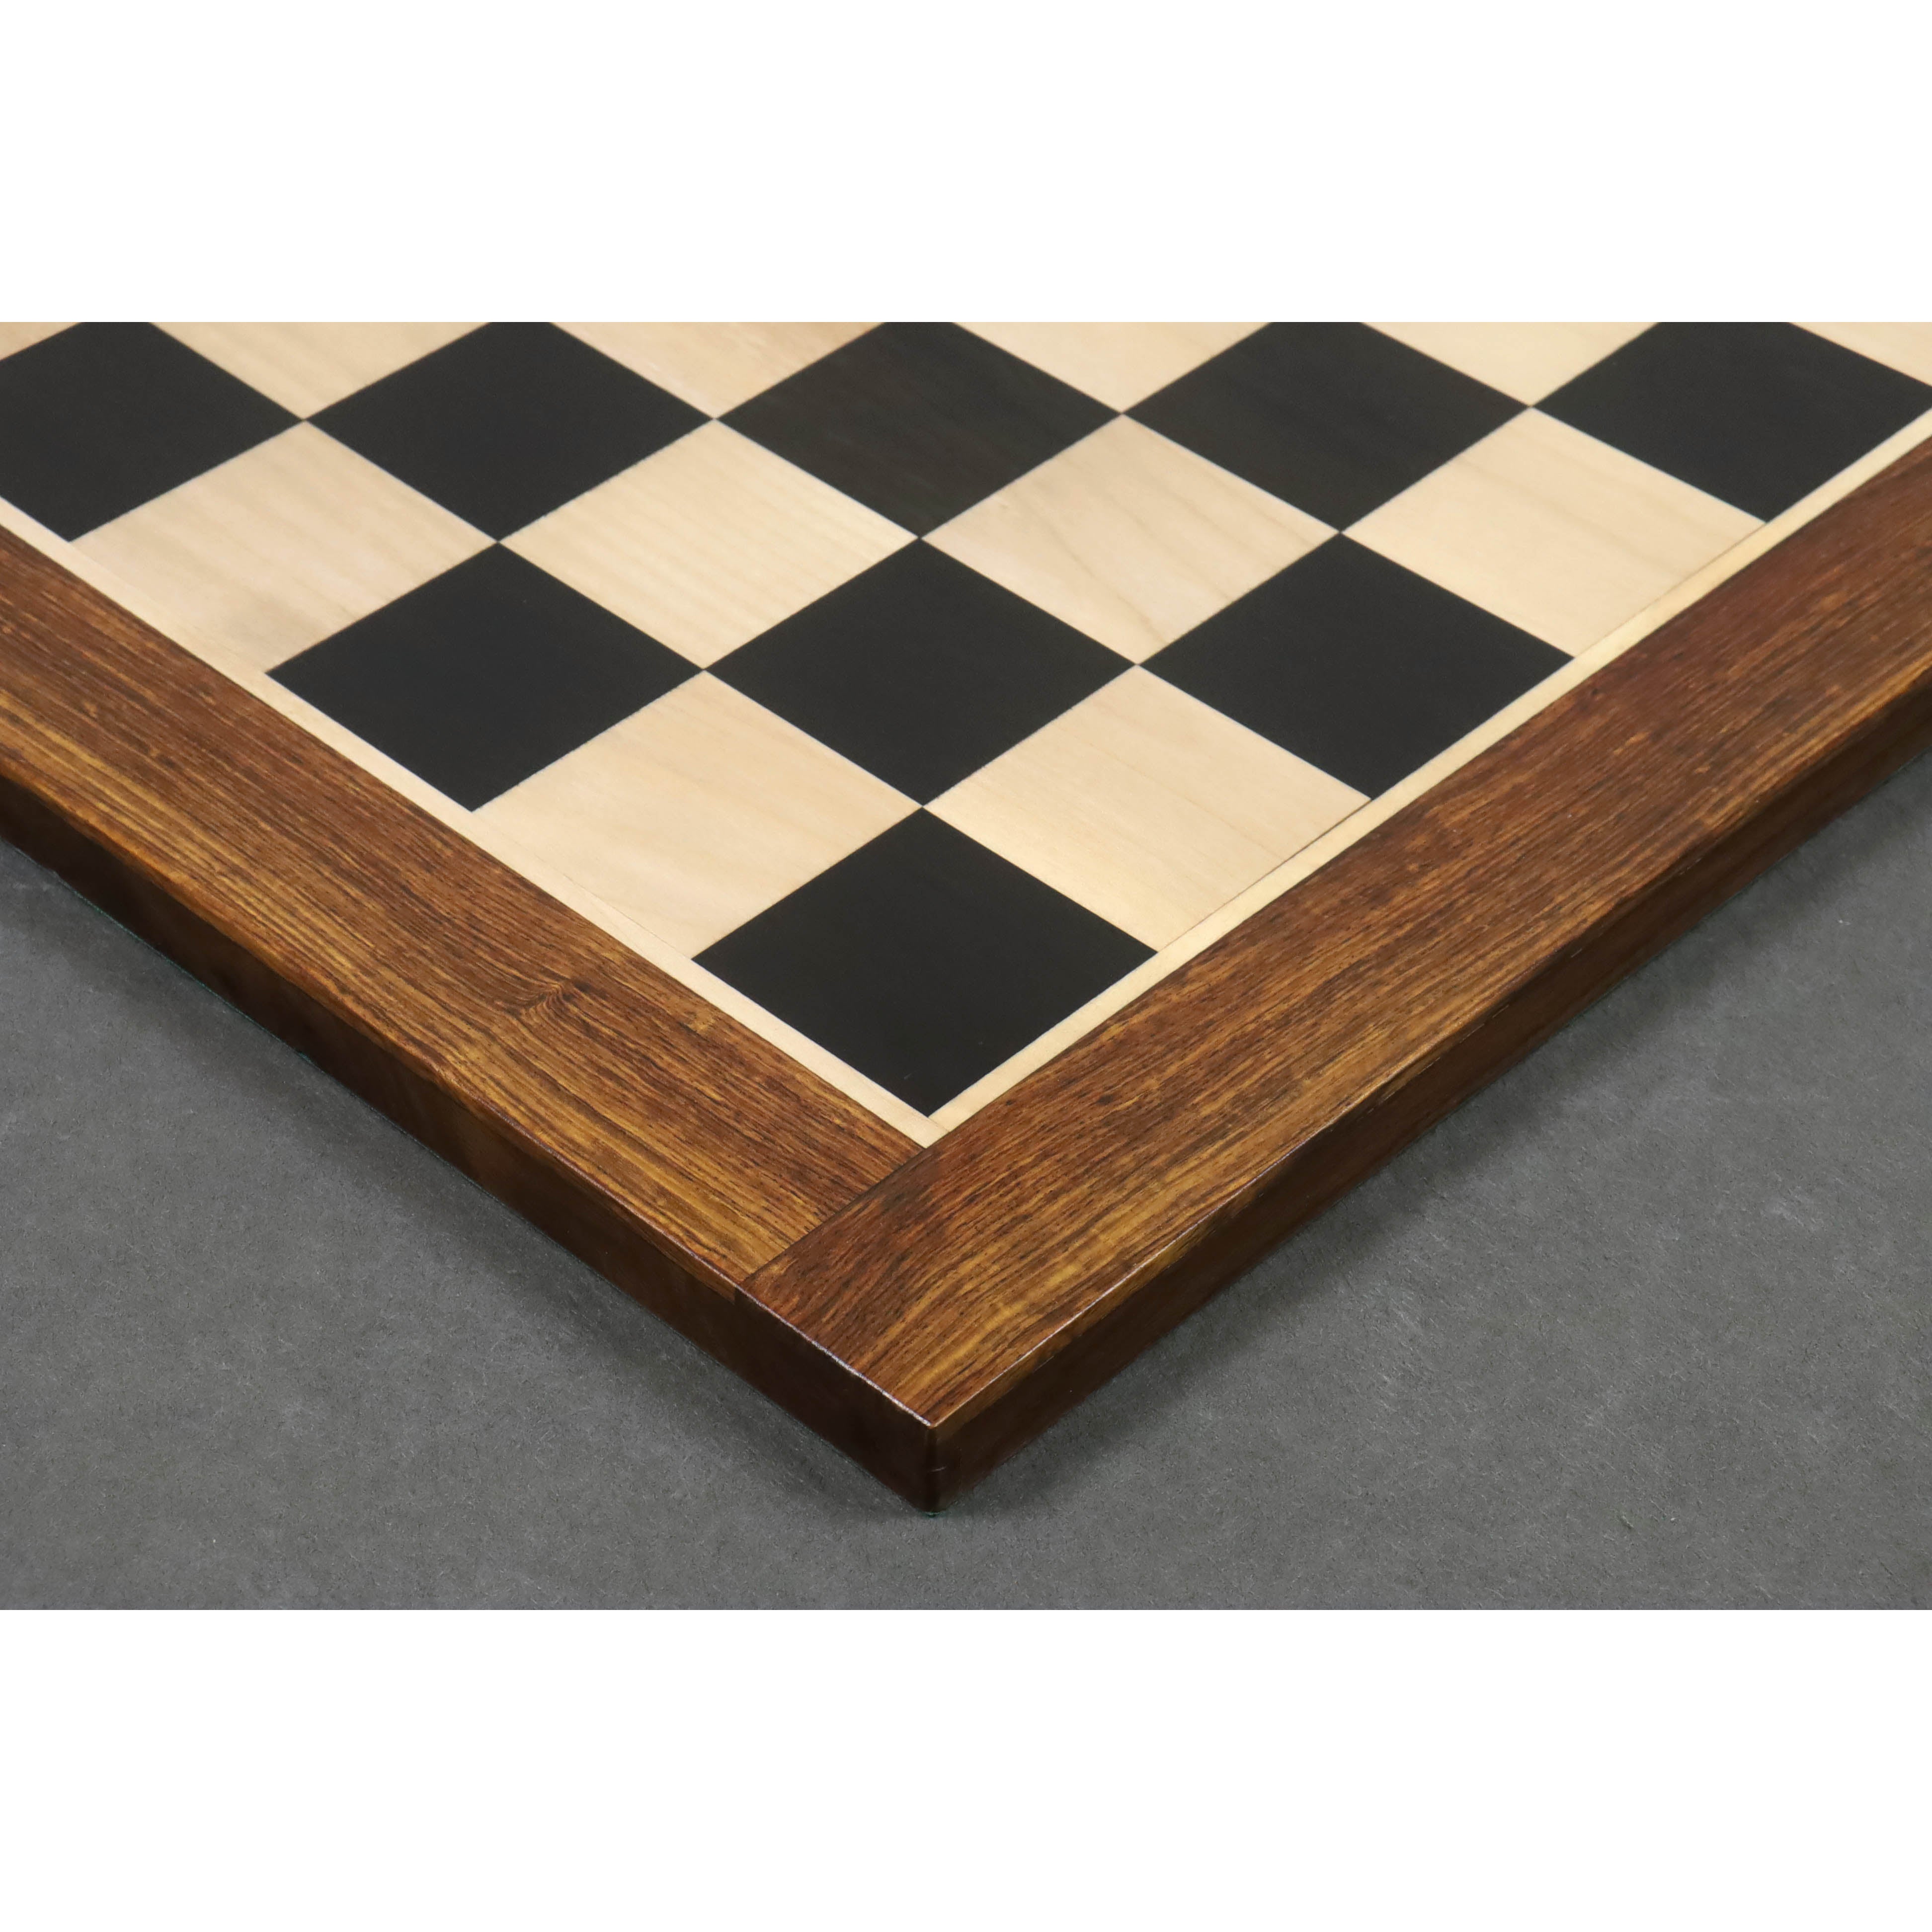 Combo of 4.1" Pro Staunton Black & White Lacquered Wooden Chess Pieces with Chessboard and Storage Box